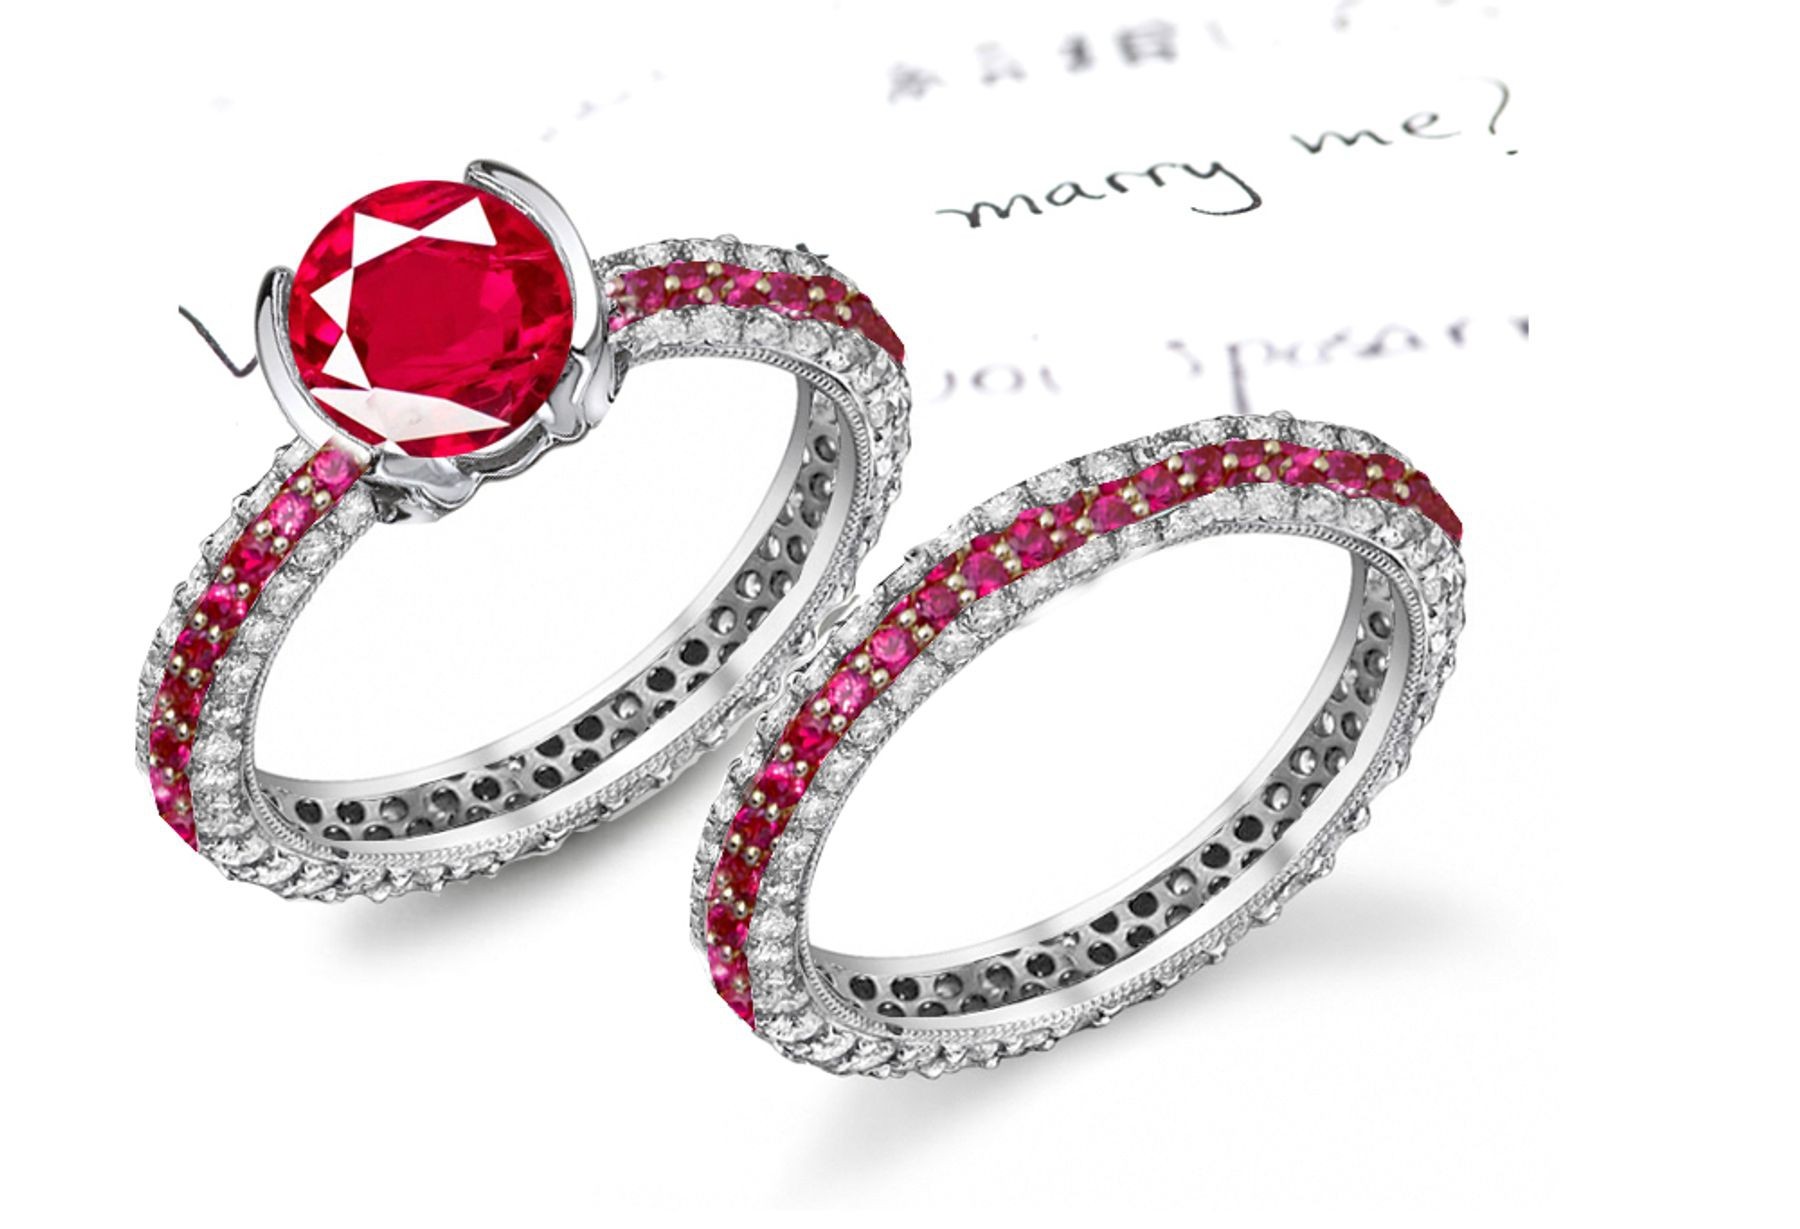 The Appropriate Design: Its Large 1.0 Round Ruby Placed on Top French Pave Set Rubies & Diamonds Set in Ring & Band